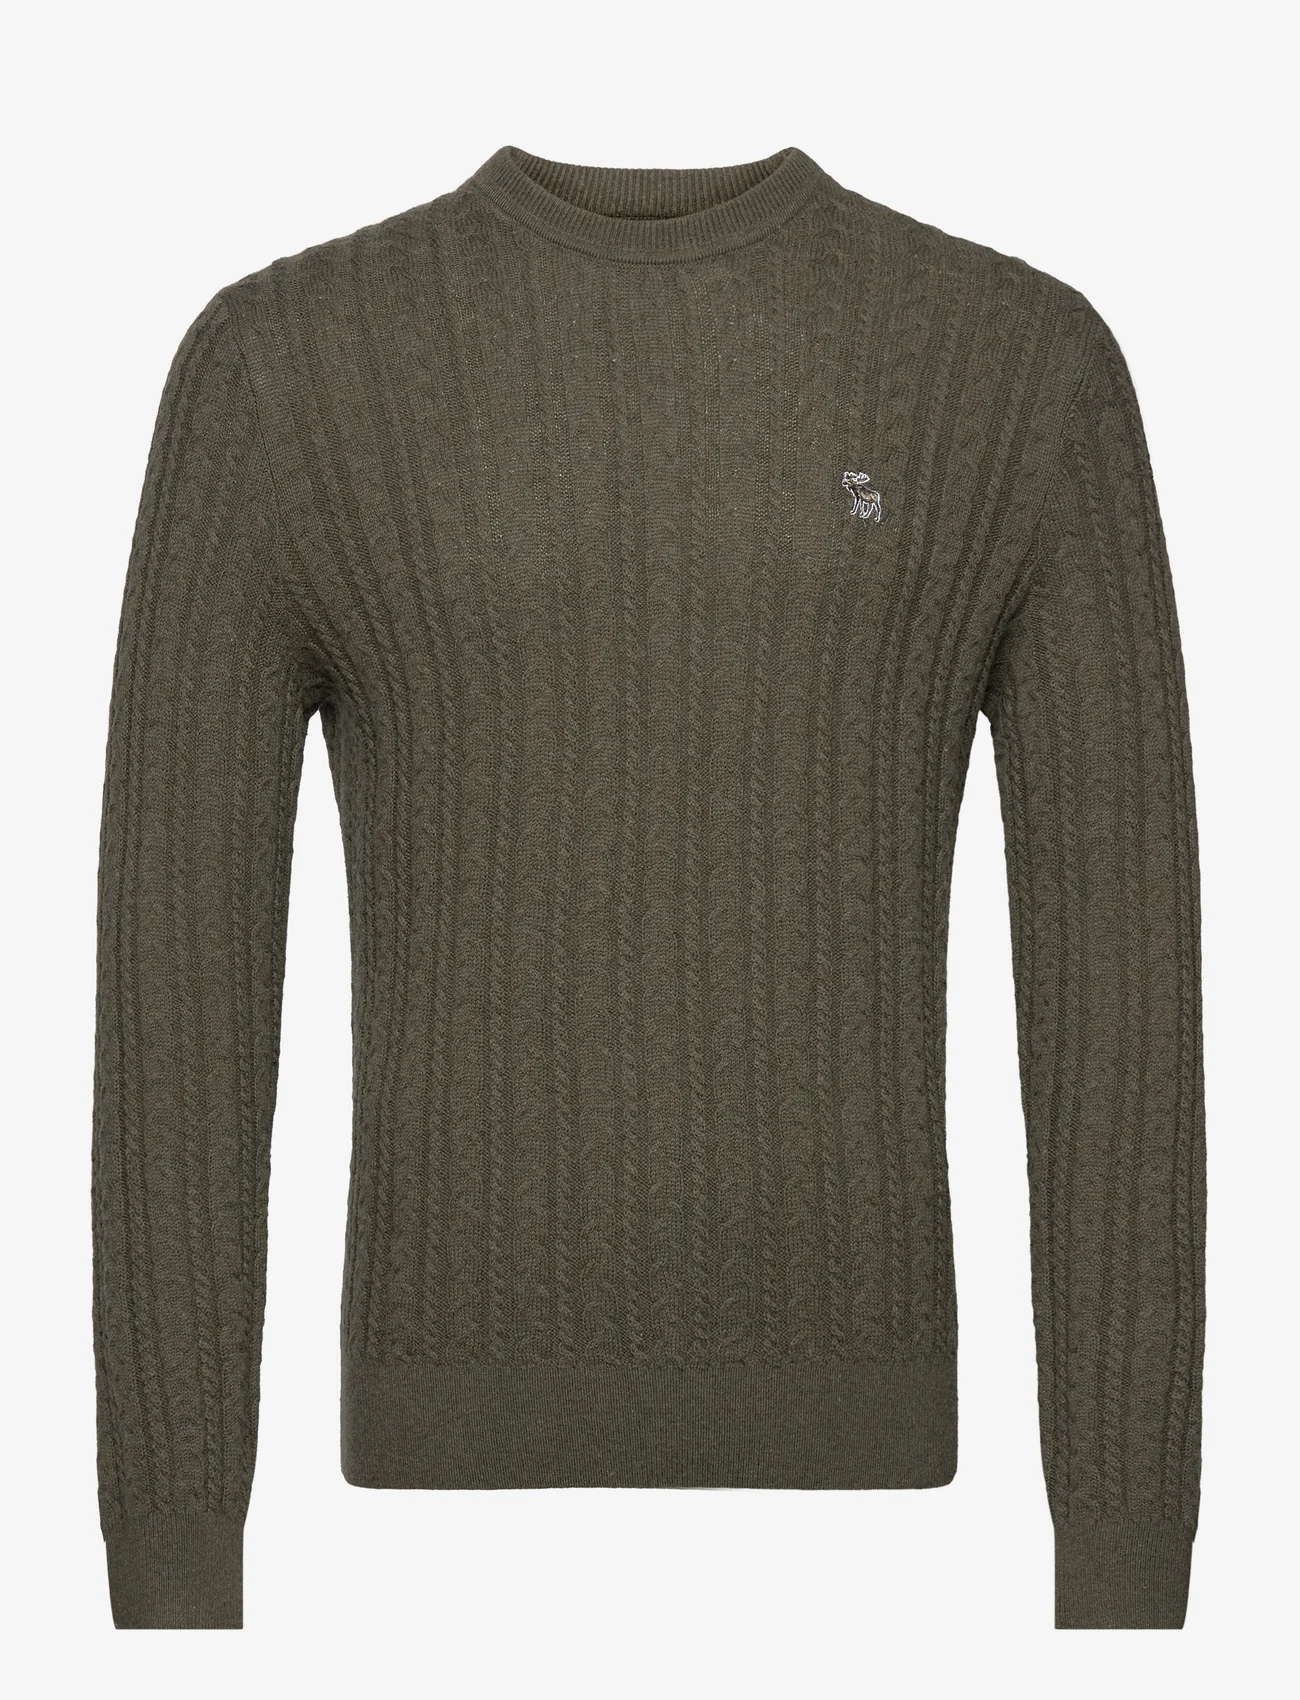 Abercrombie & Fitch - ANF MENS SWEATERS - knitted round necks - olive heather - 0